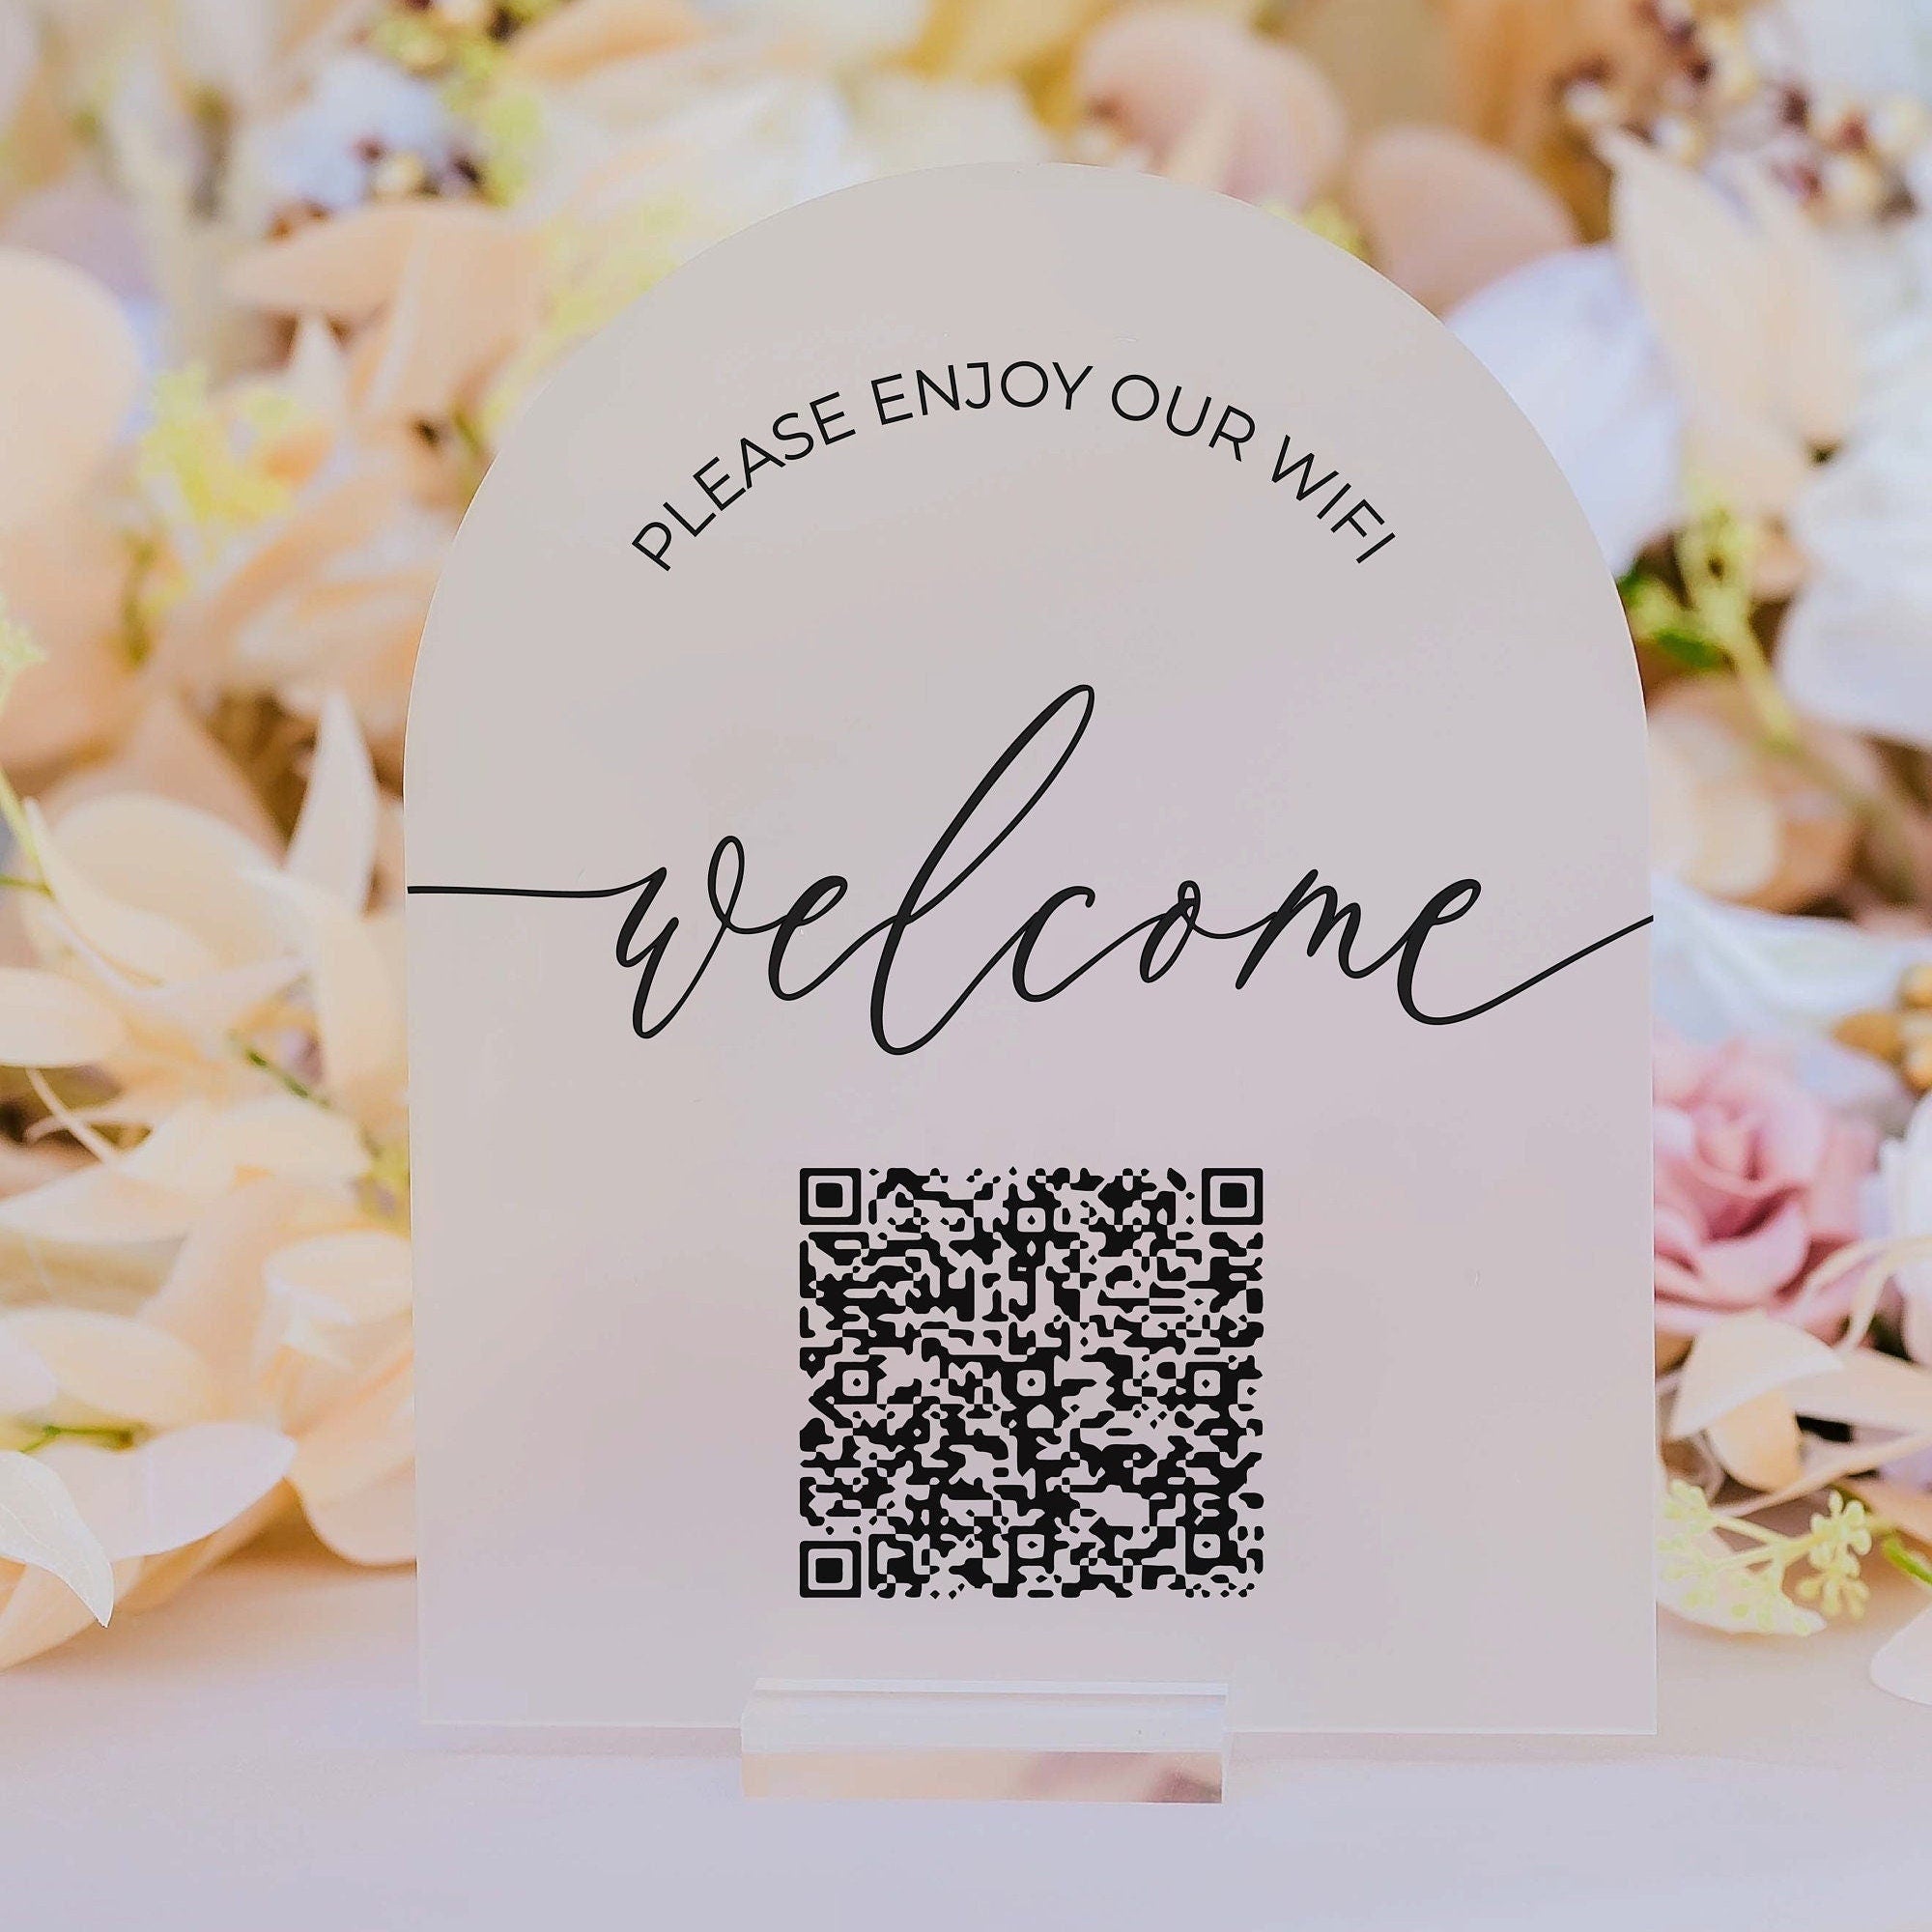 Scannable WIFI QR Code Welcome Please Enjoy Our Wireless Internet Clear Glass Look Acrylic Sign, WIFI Password Plexiglass Perspex Lucite